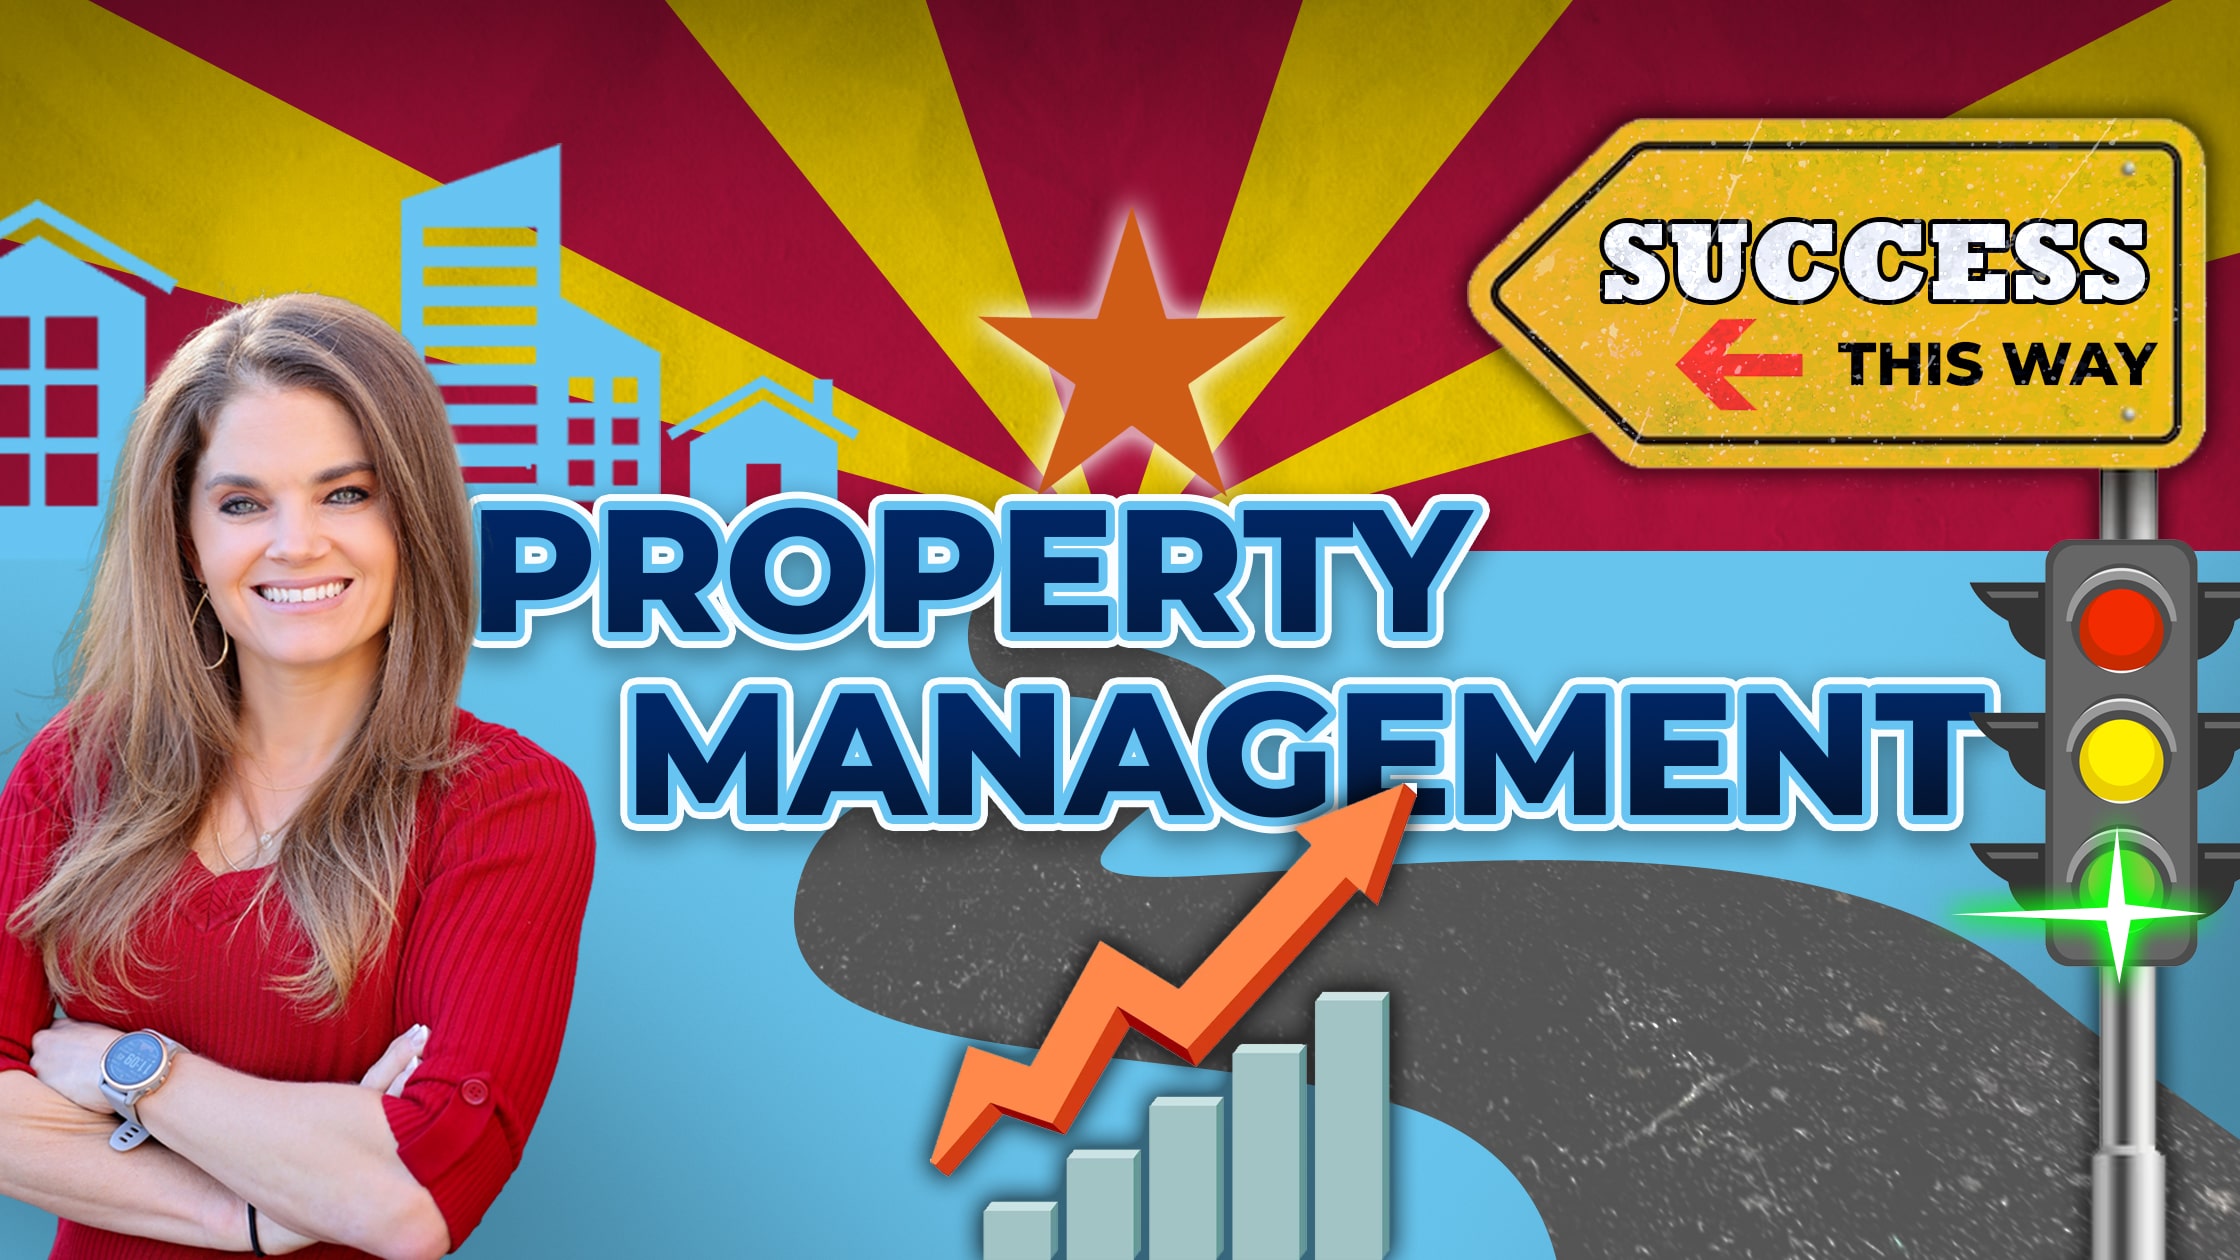 The Benefits of Using a Property Management Company in Arizona